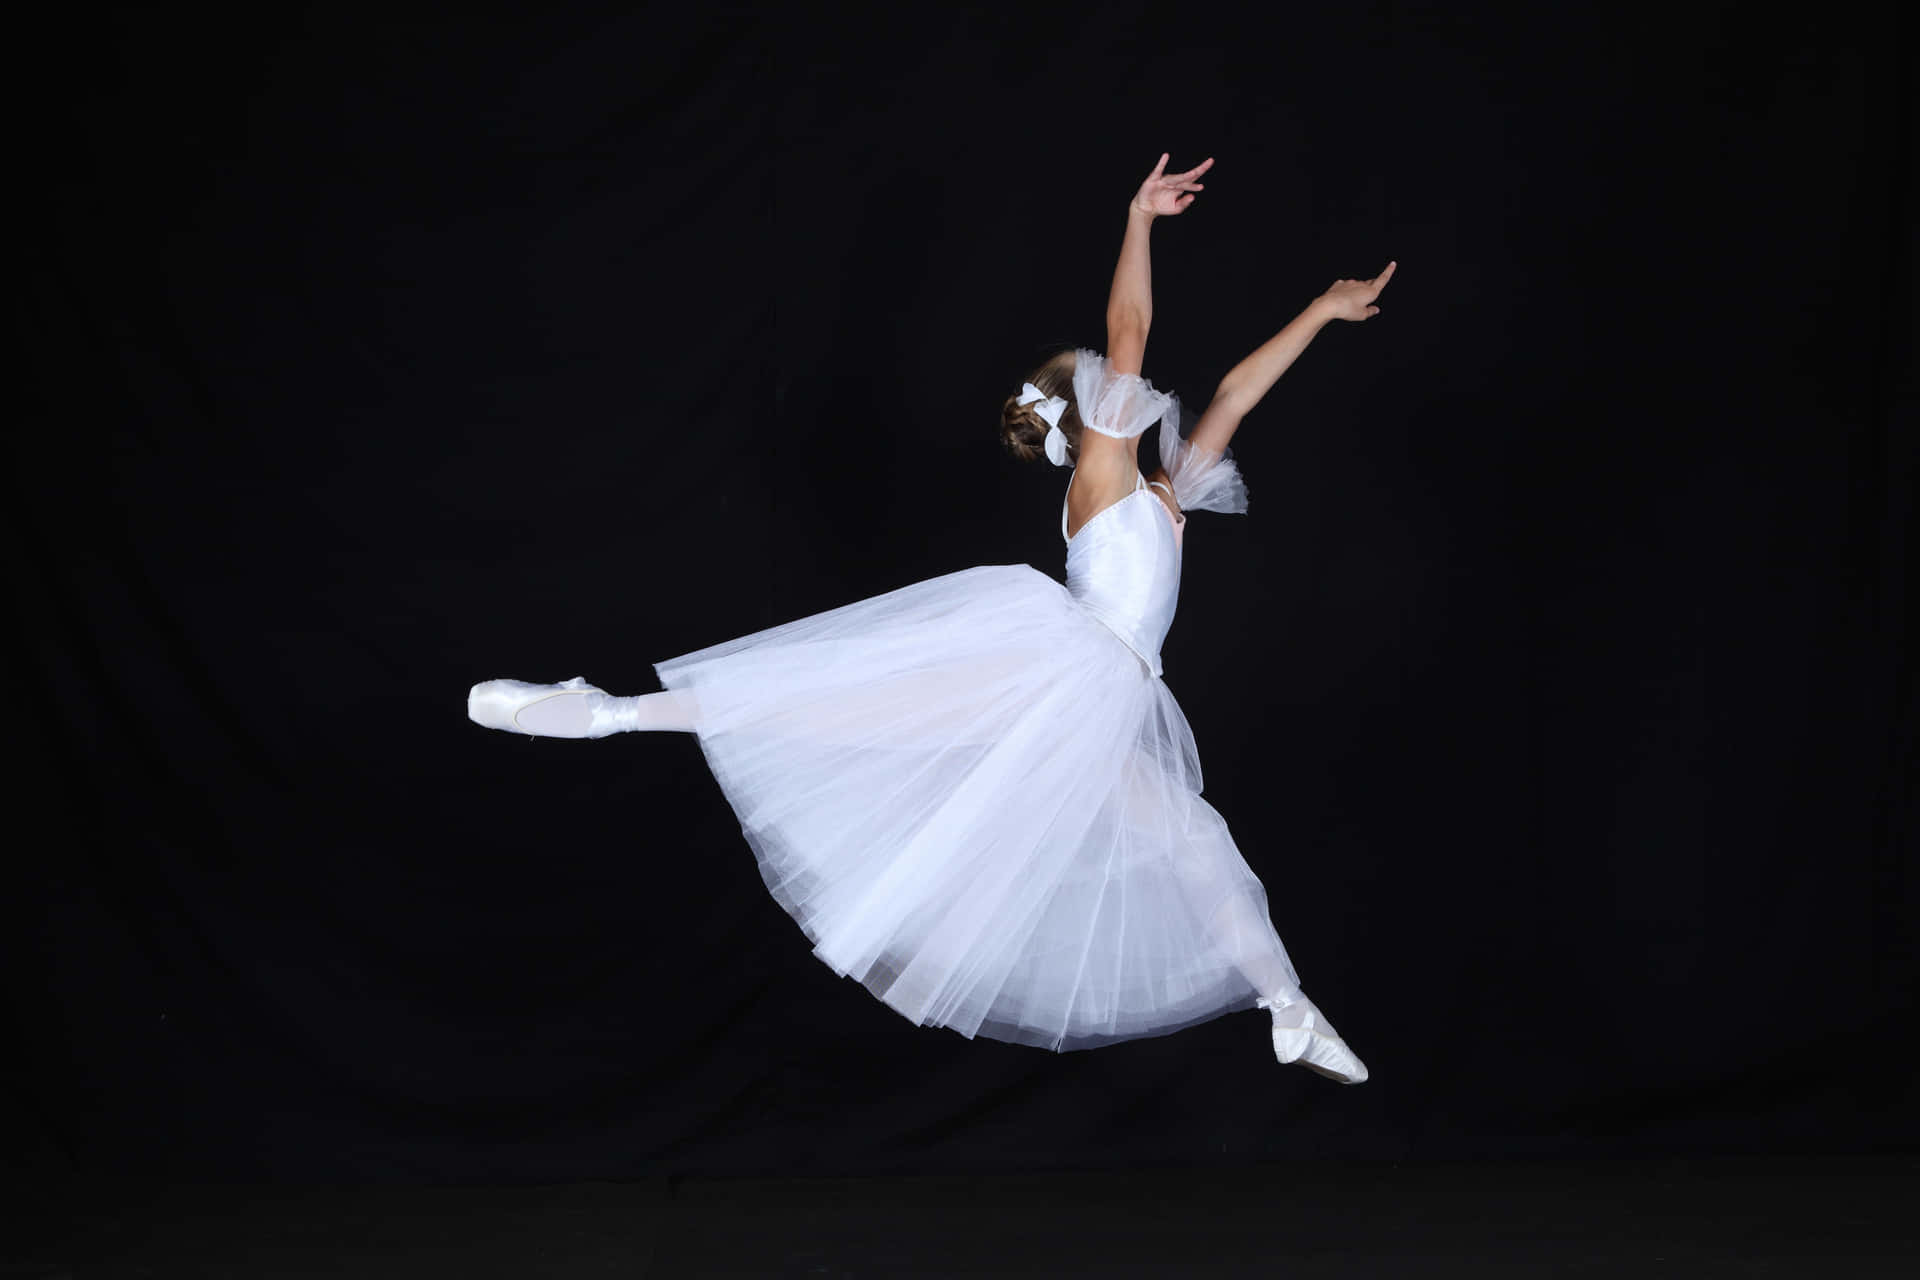 A Young Girl In White Ballet Dress Is Jumping